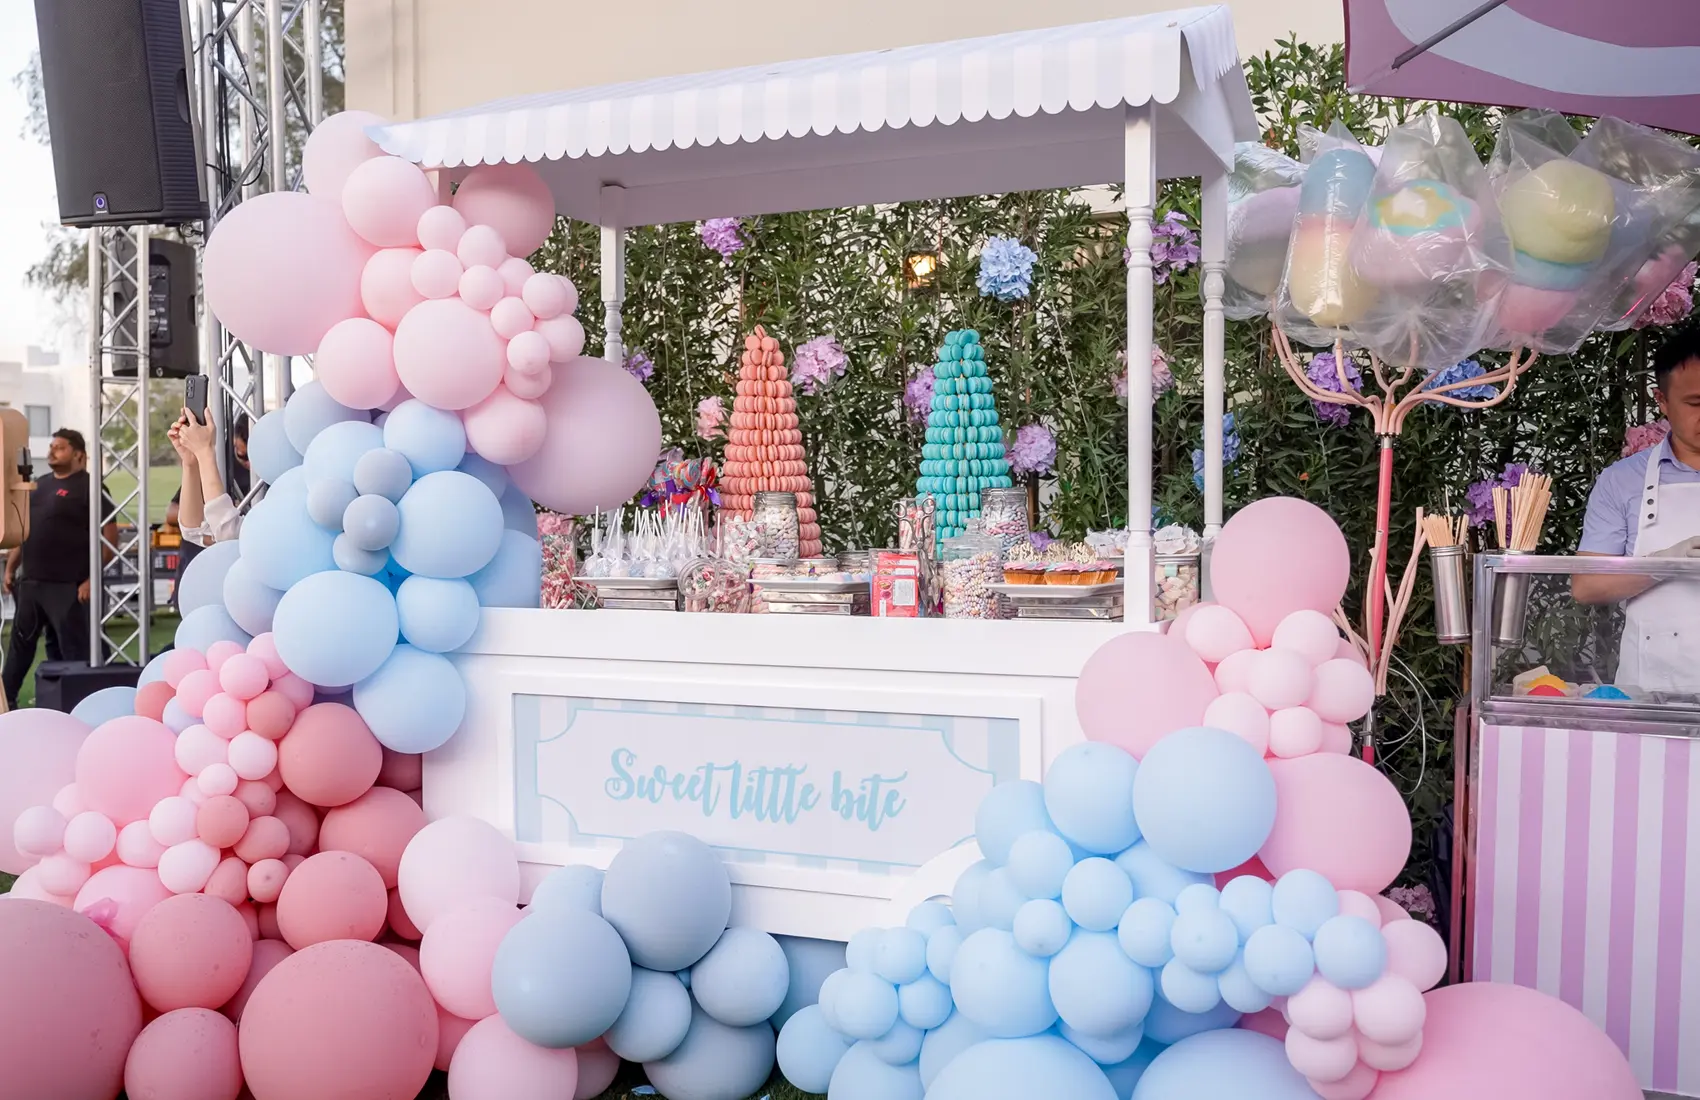 He or She? – A Grand Gender Reveal Photos